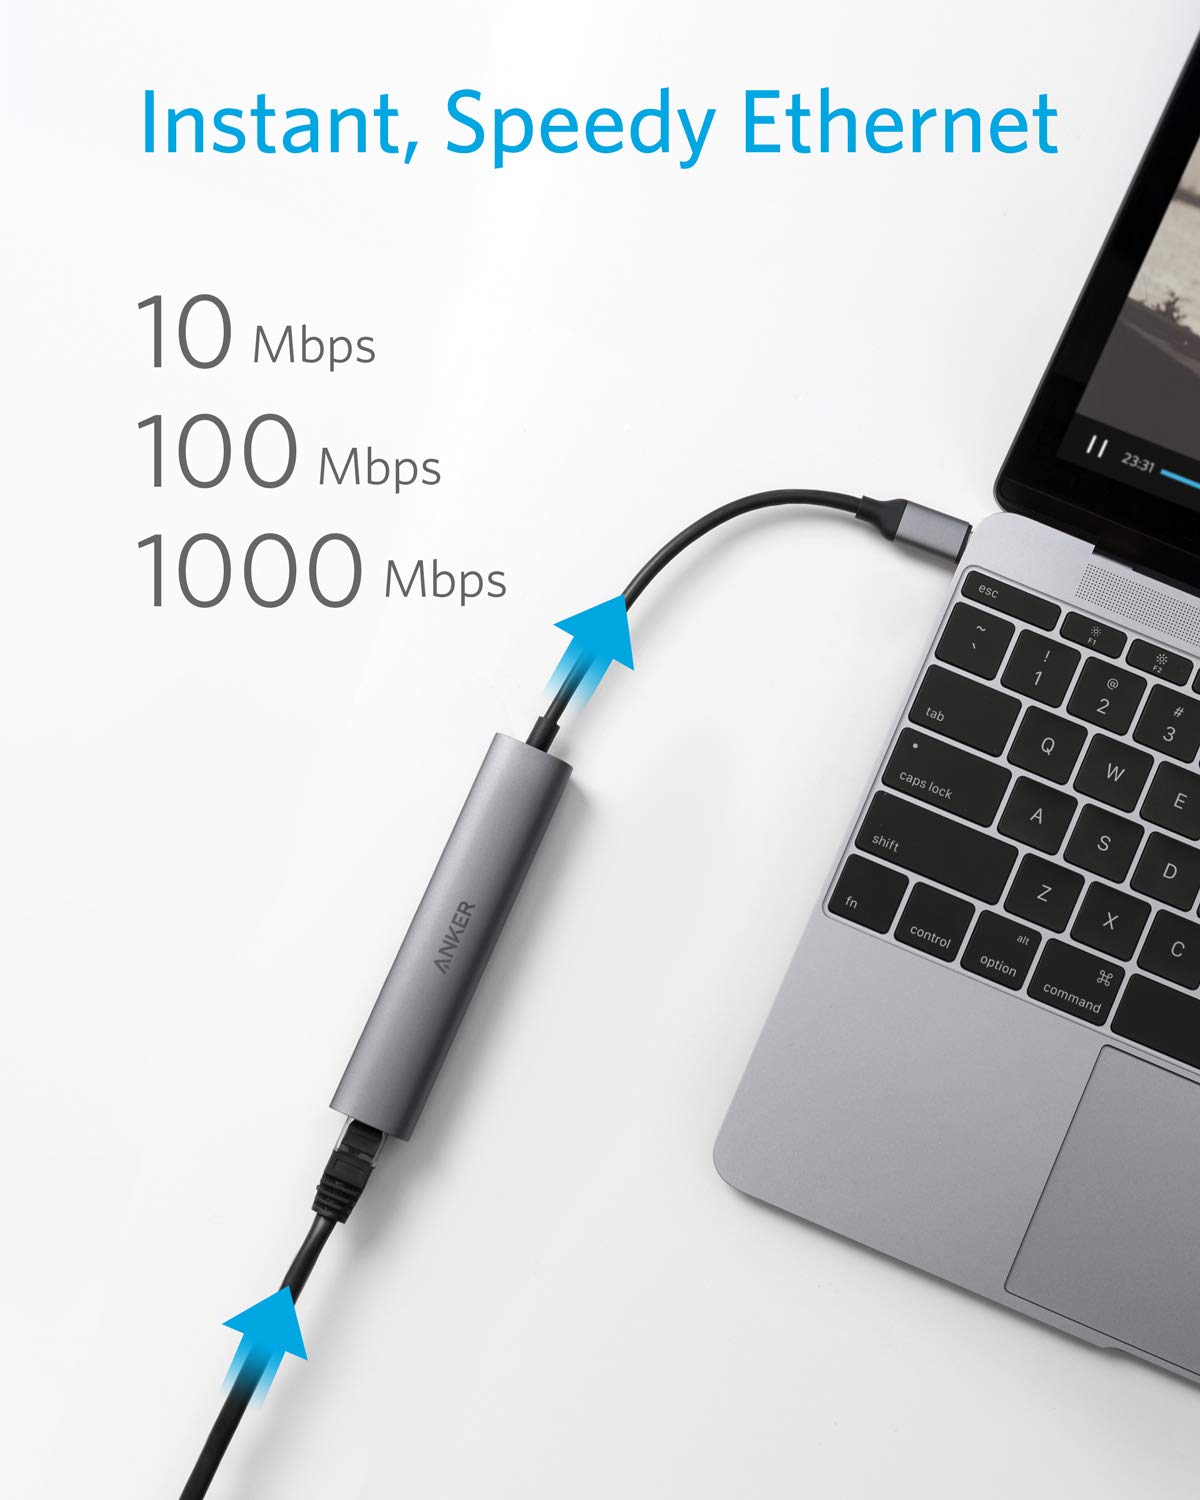 Anker 5-in-1 USB-C Hub On Sale for 35% Off [Deal]